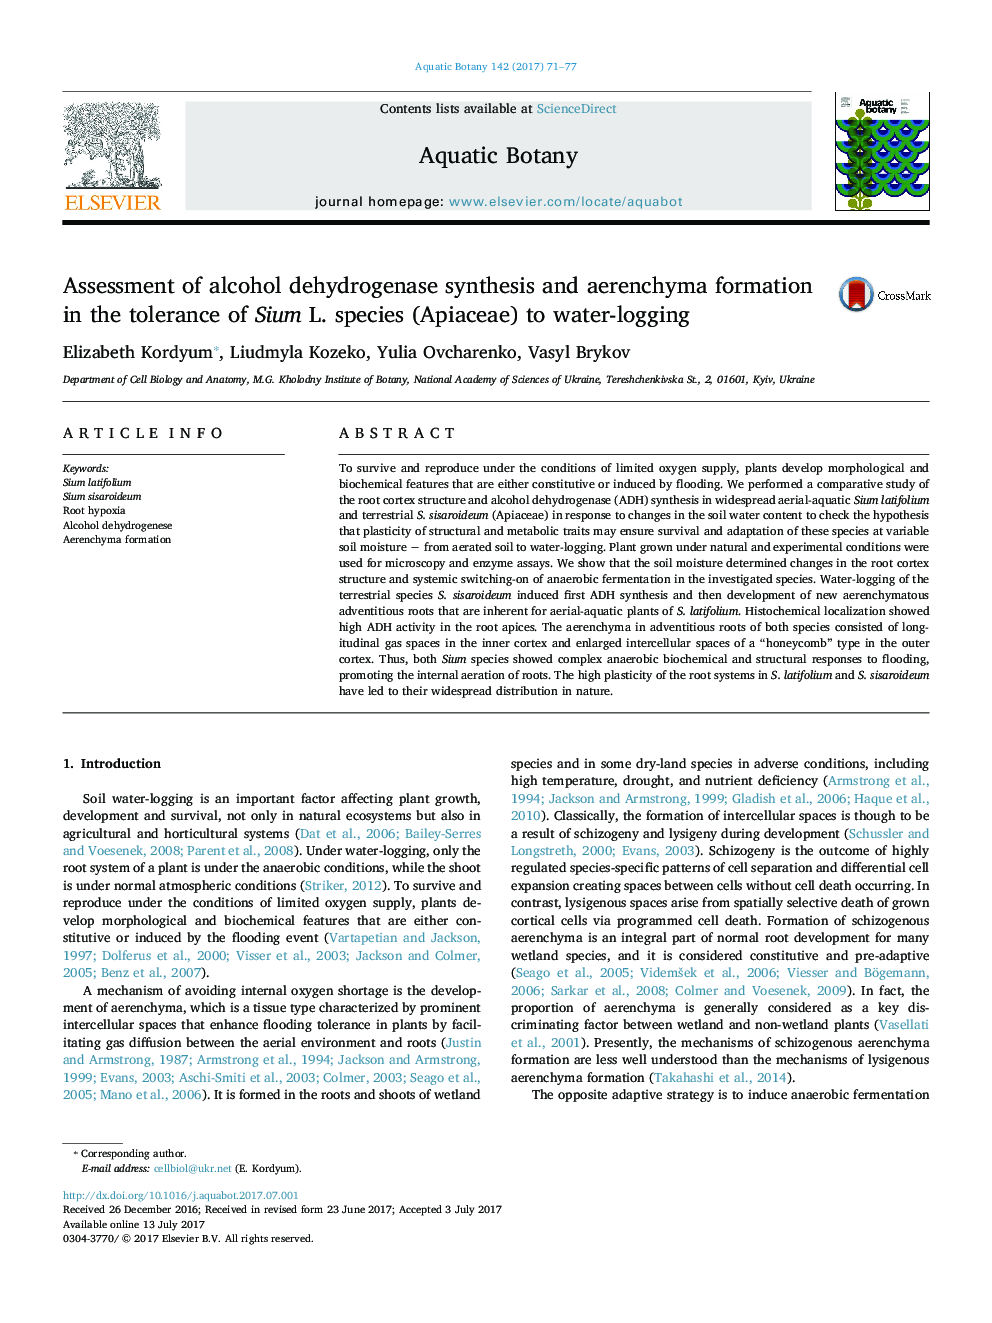 Assessment of alcohol dehydrogenase synthesis and aerenchyma formation in the tolerance of Sium L. species (Apiaceae) to water-logging